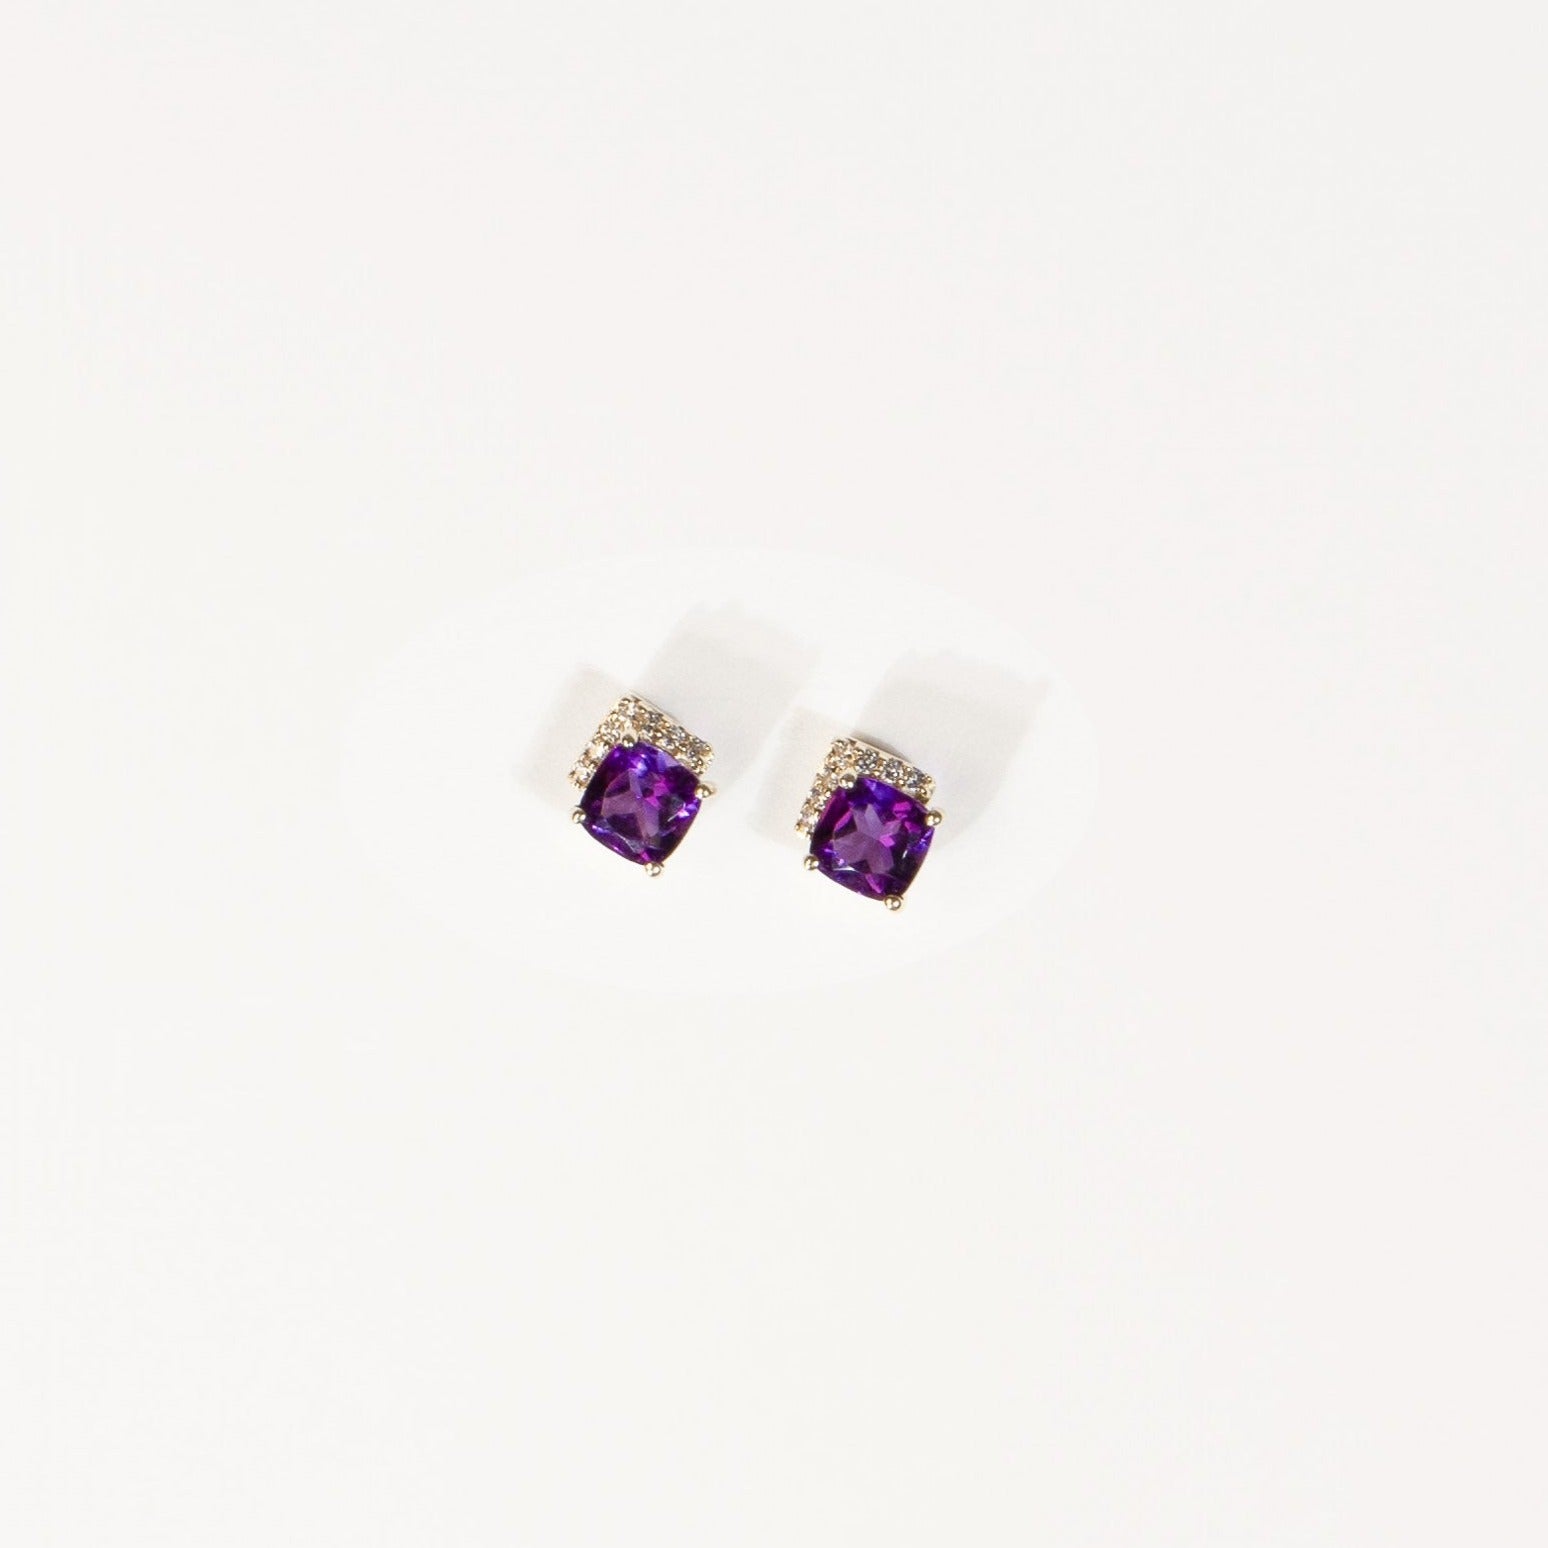 Cushion Cut Amethyst Studs with White Sapphire Pave Accent Earrings Estella Collection #product_description# 32660 Amethyst Colorless Gemstone Made to Order #tag4# #tag5# #tag6# #tag7# #tag8# #tag9# #tag10#